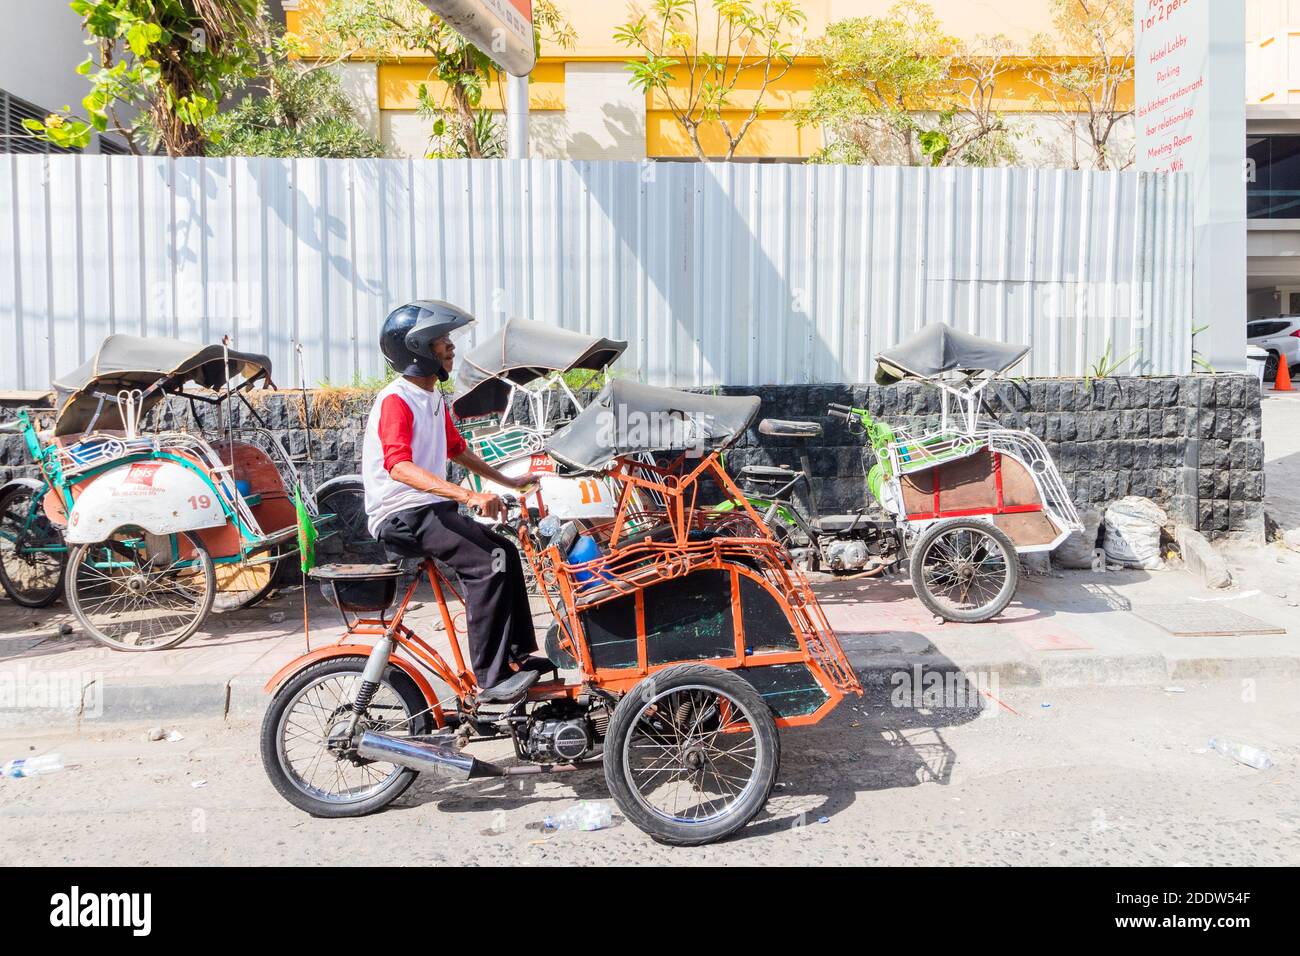 Local tricycle transport called 'becak' at a street in Yogyakarta, Indonesia Stock Photo